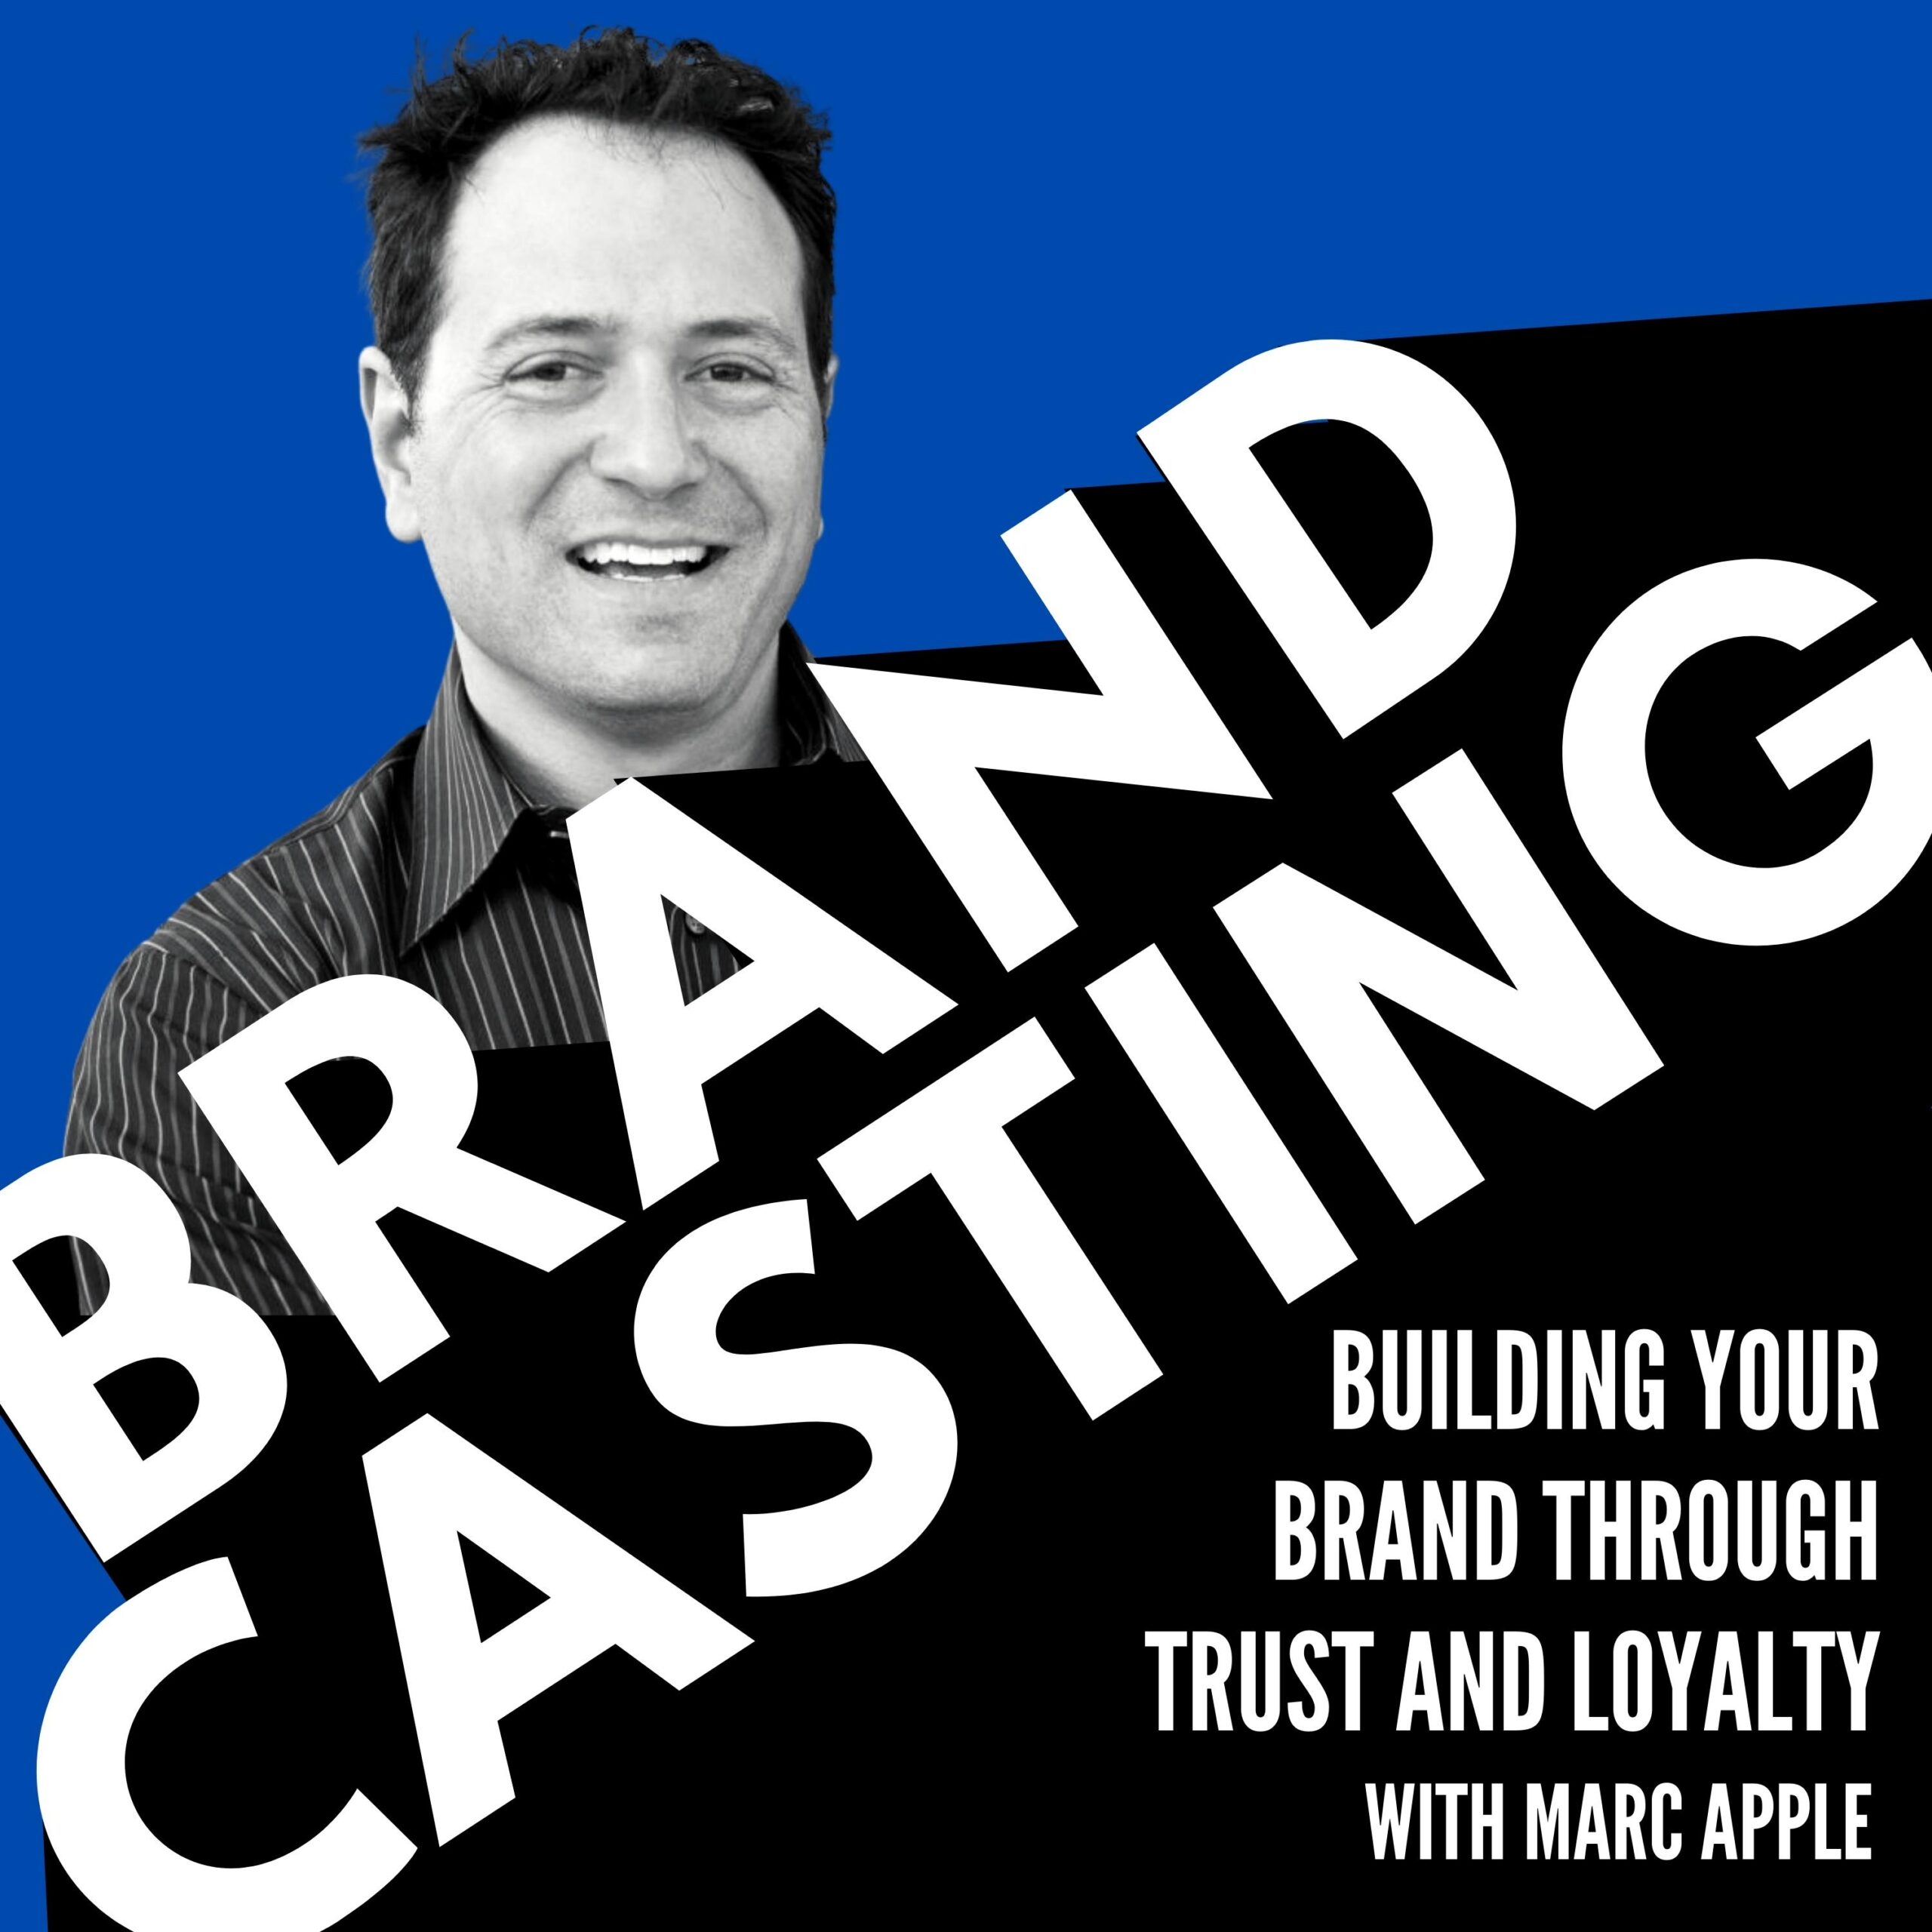 Brandcasting - Build Your Brand Through Trust and Loyalty